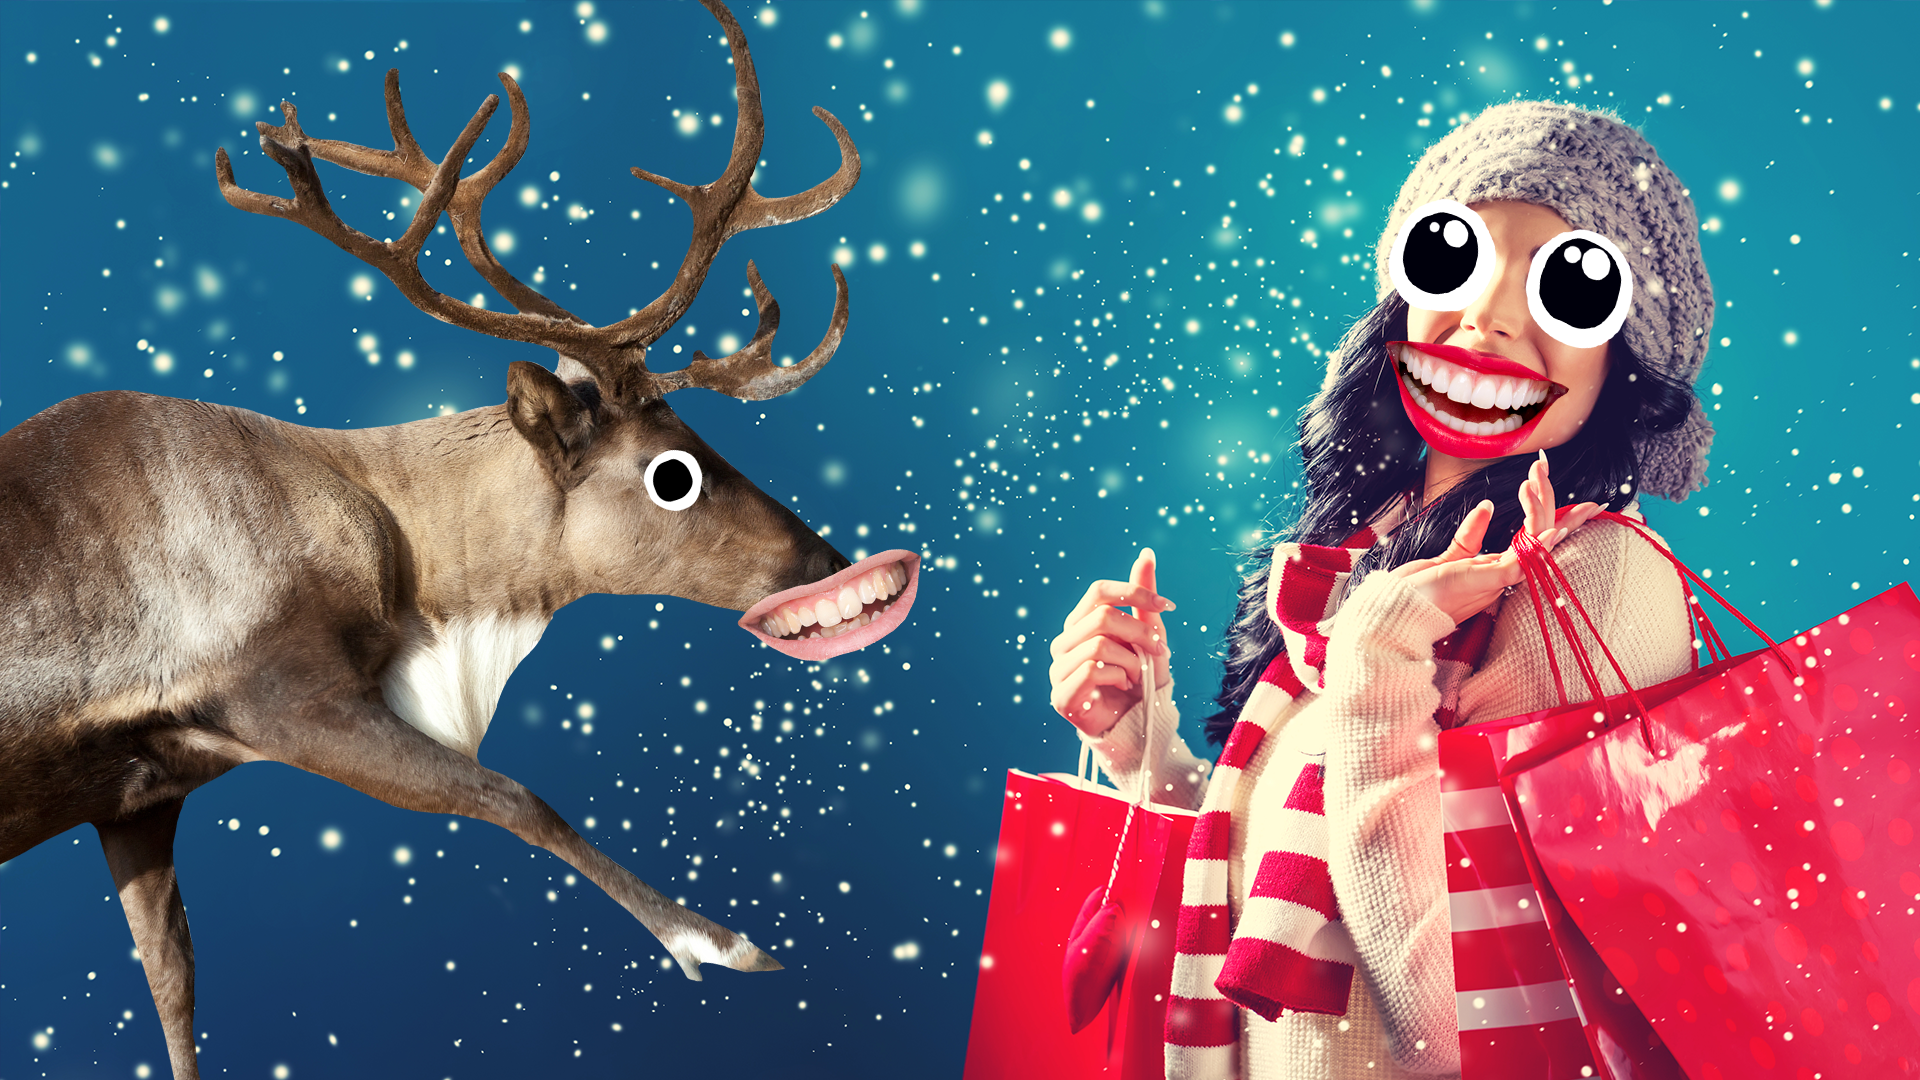 A person Christmas shopping with a smiling reindeer